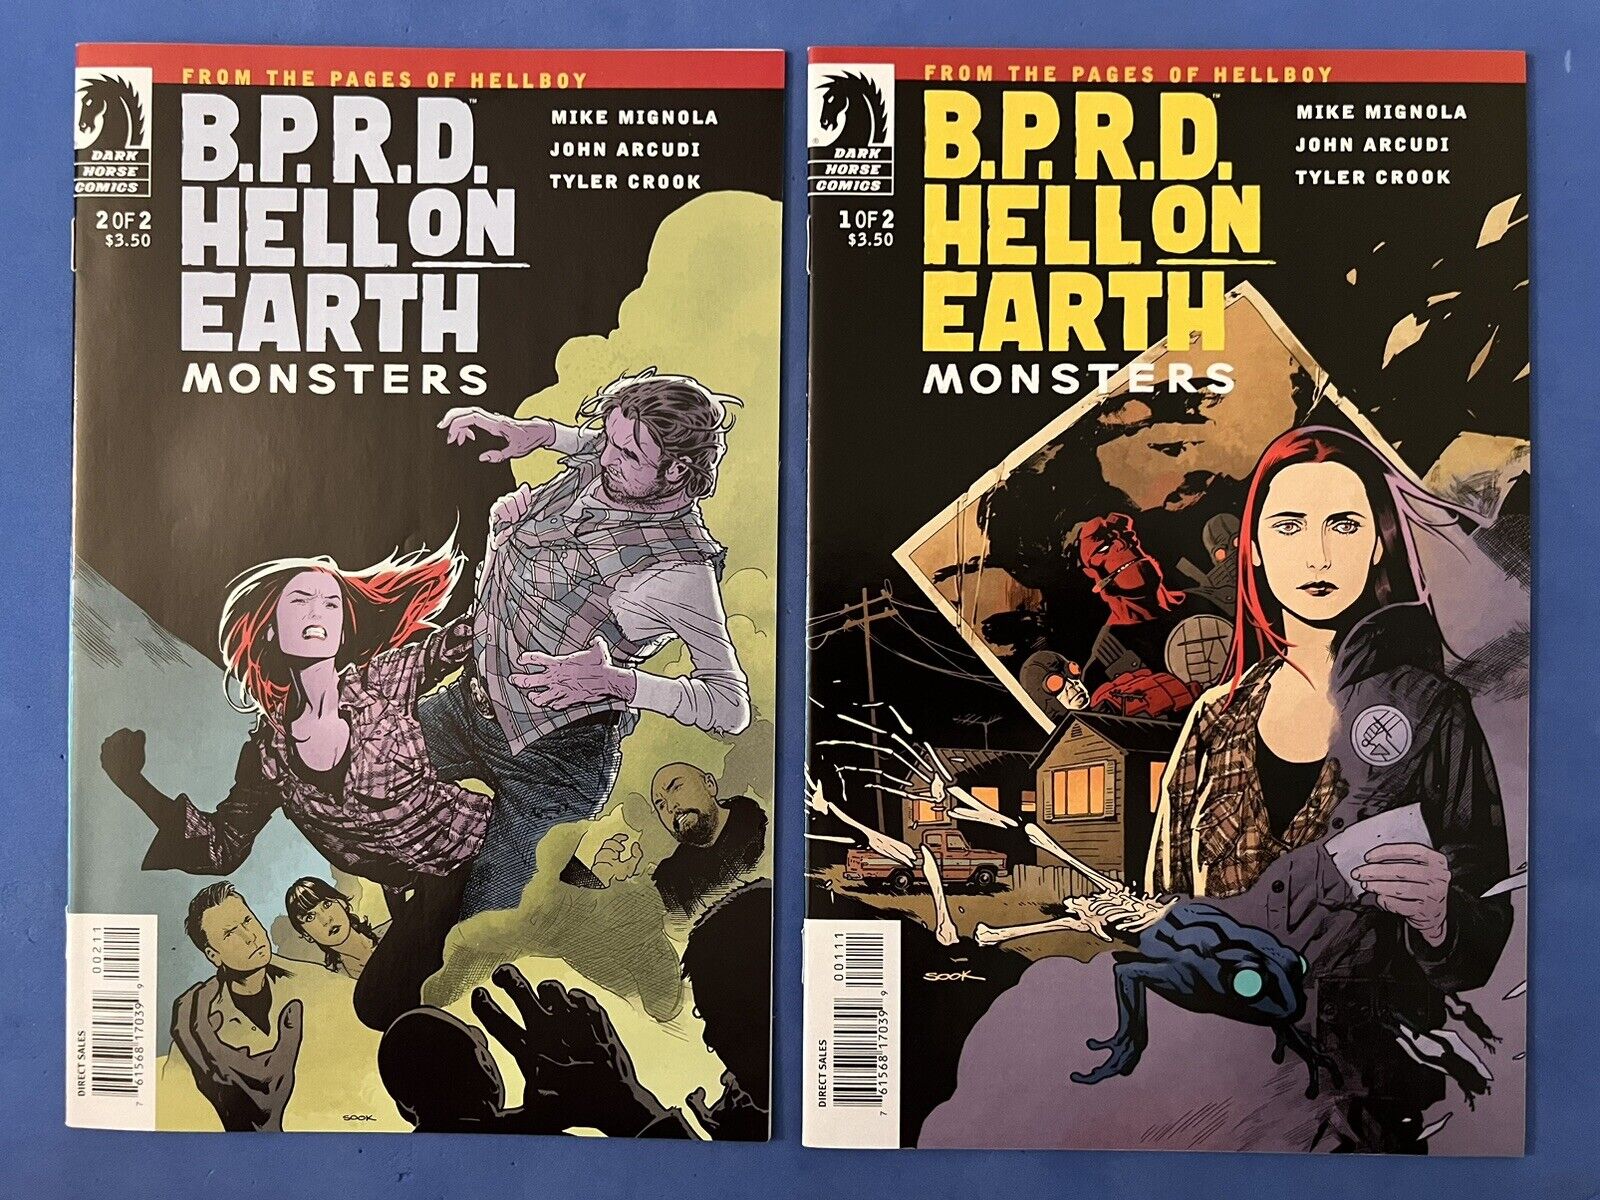 BPRD Hell on Earth Monsters #1-2 COMPLETE Dark Horse 2011 - NEAR MINT - Mignola